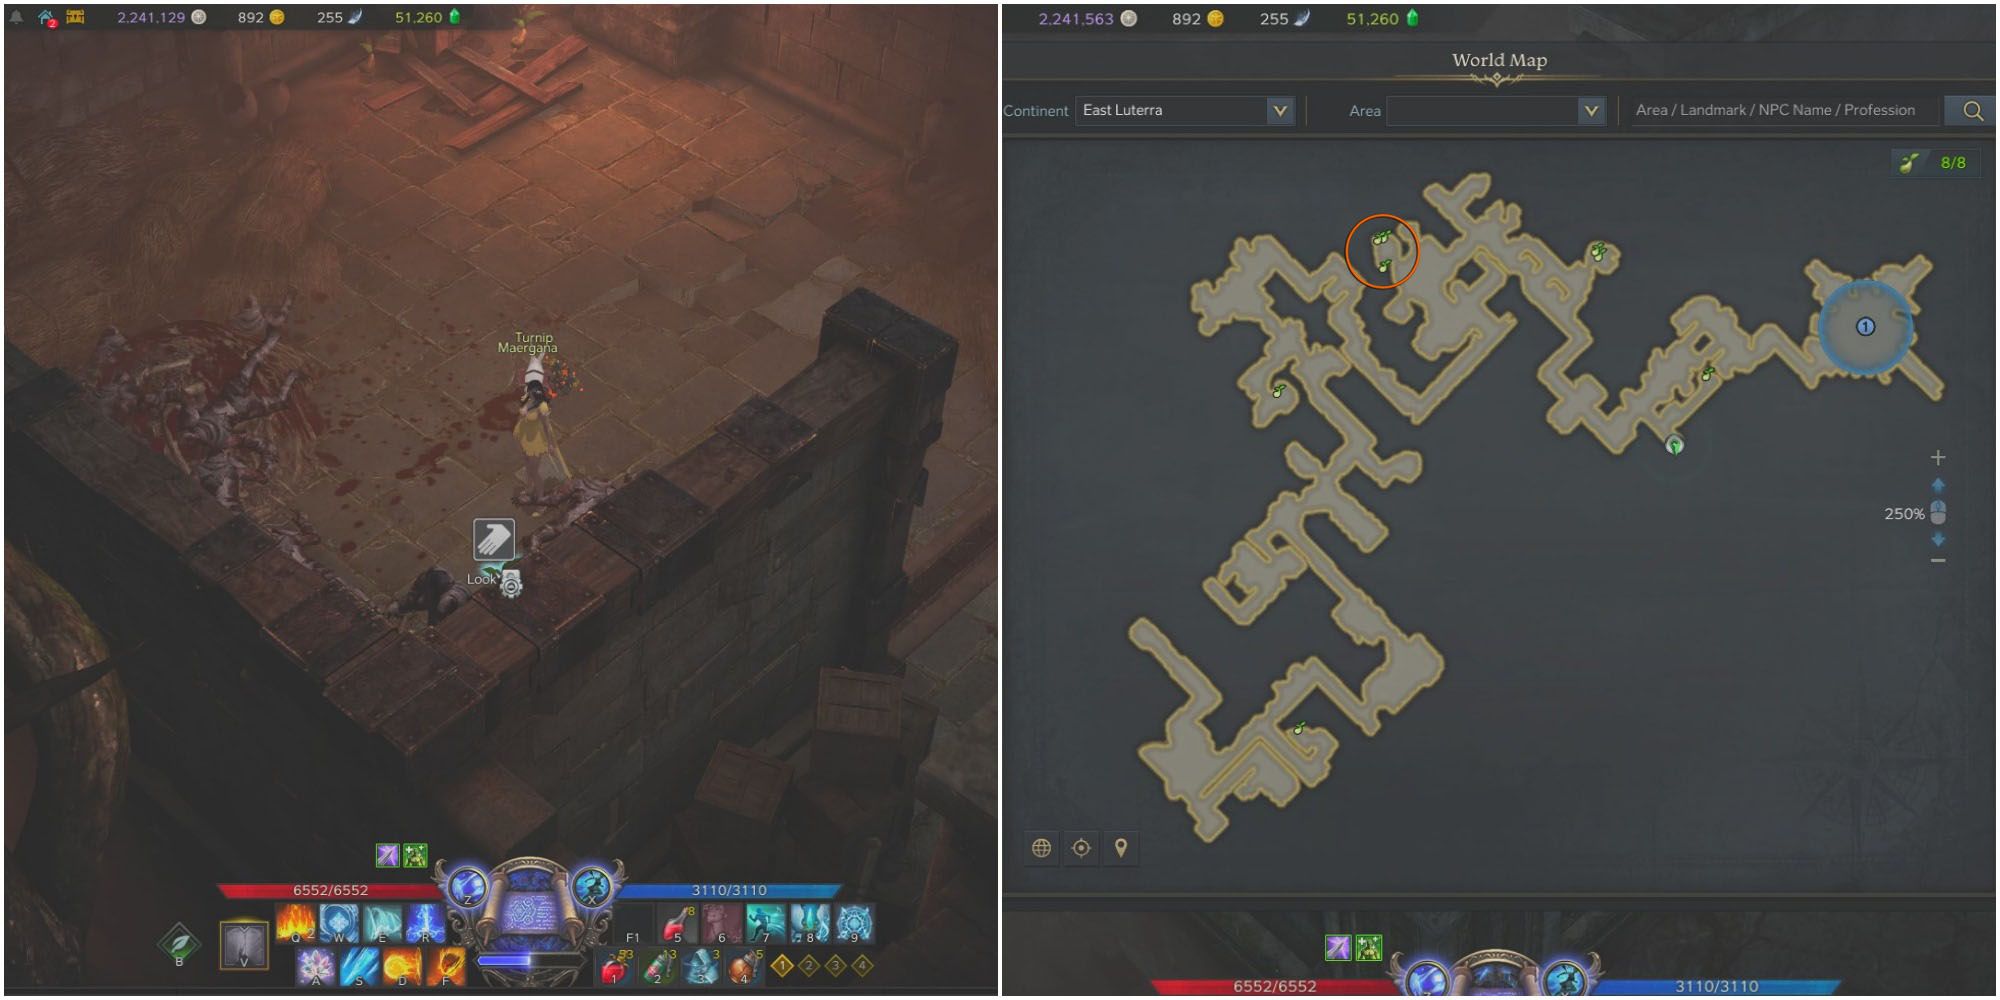 split image of player finding Mokoko Seed 3 in jail cell and map of blackrose basement